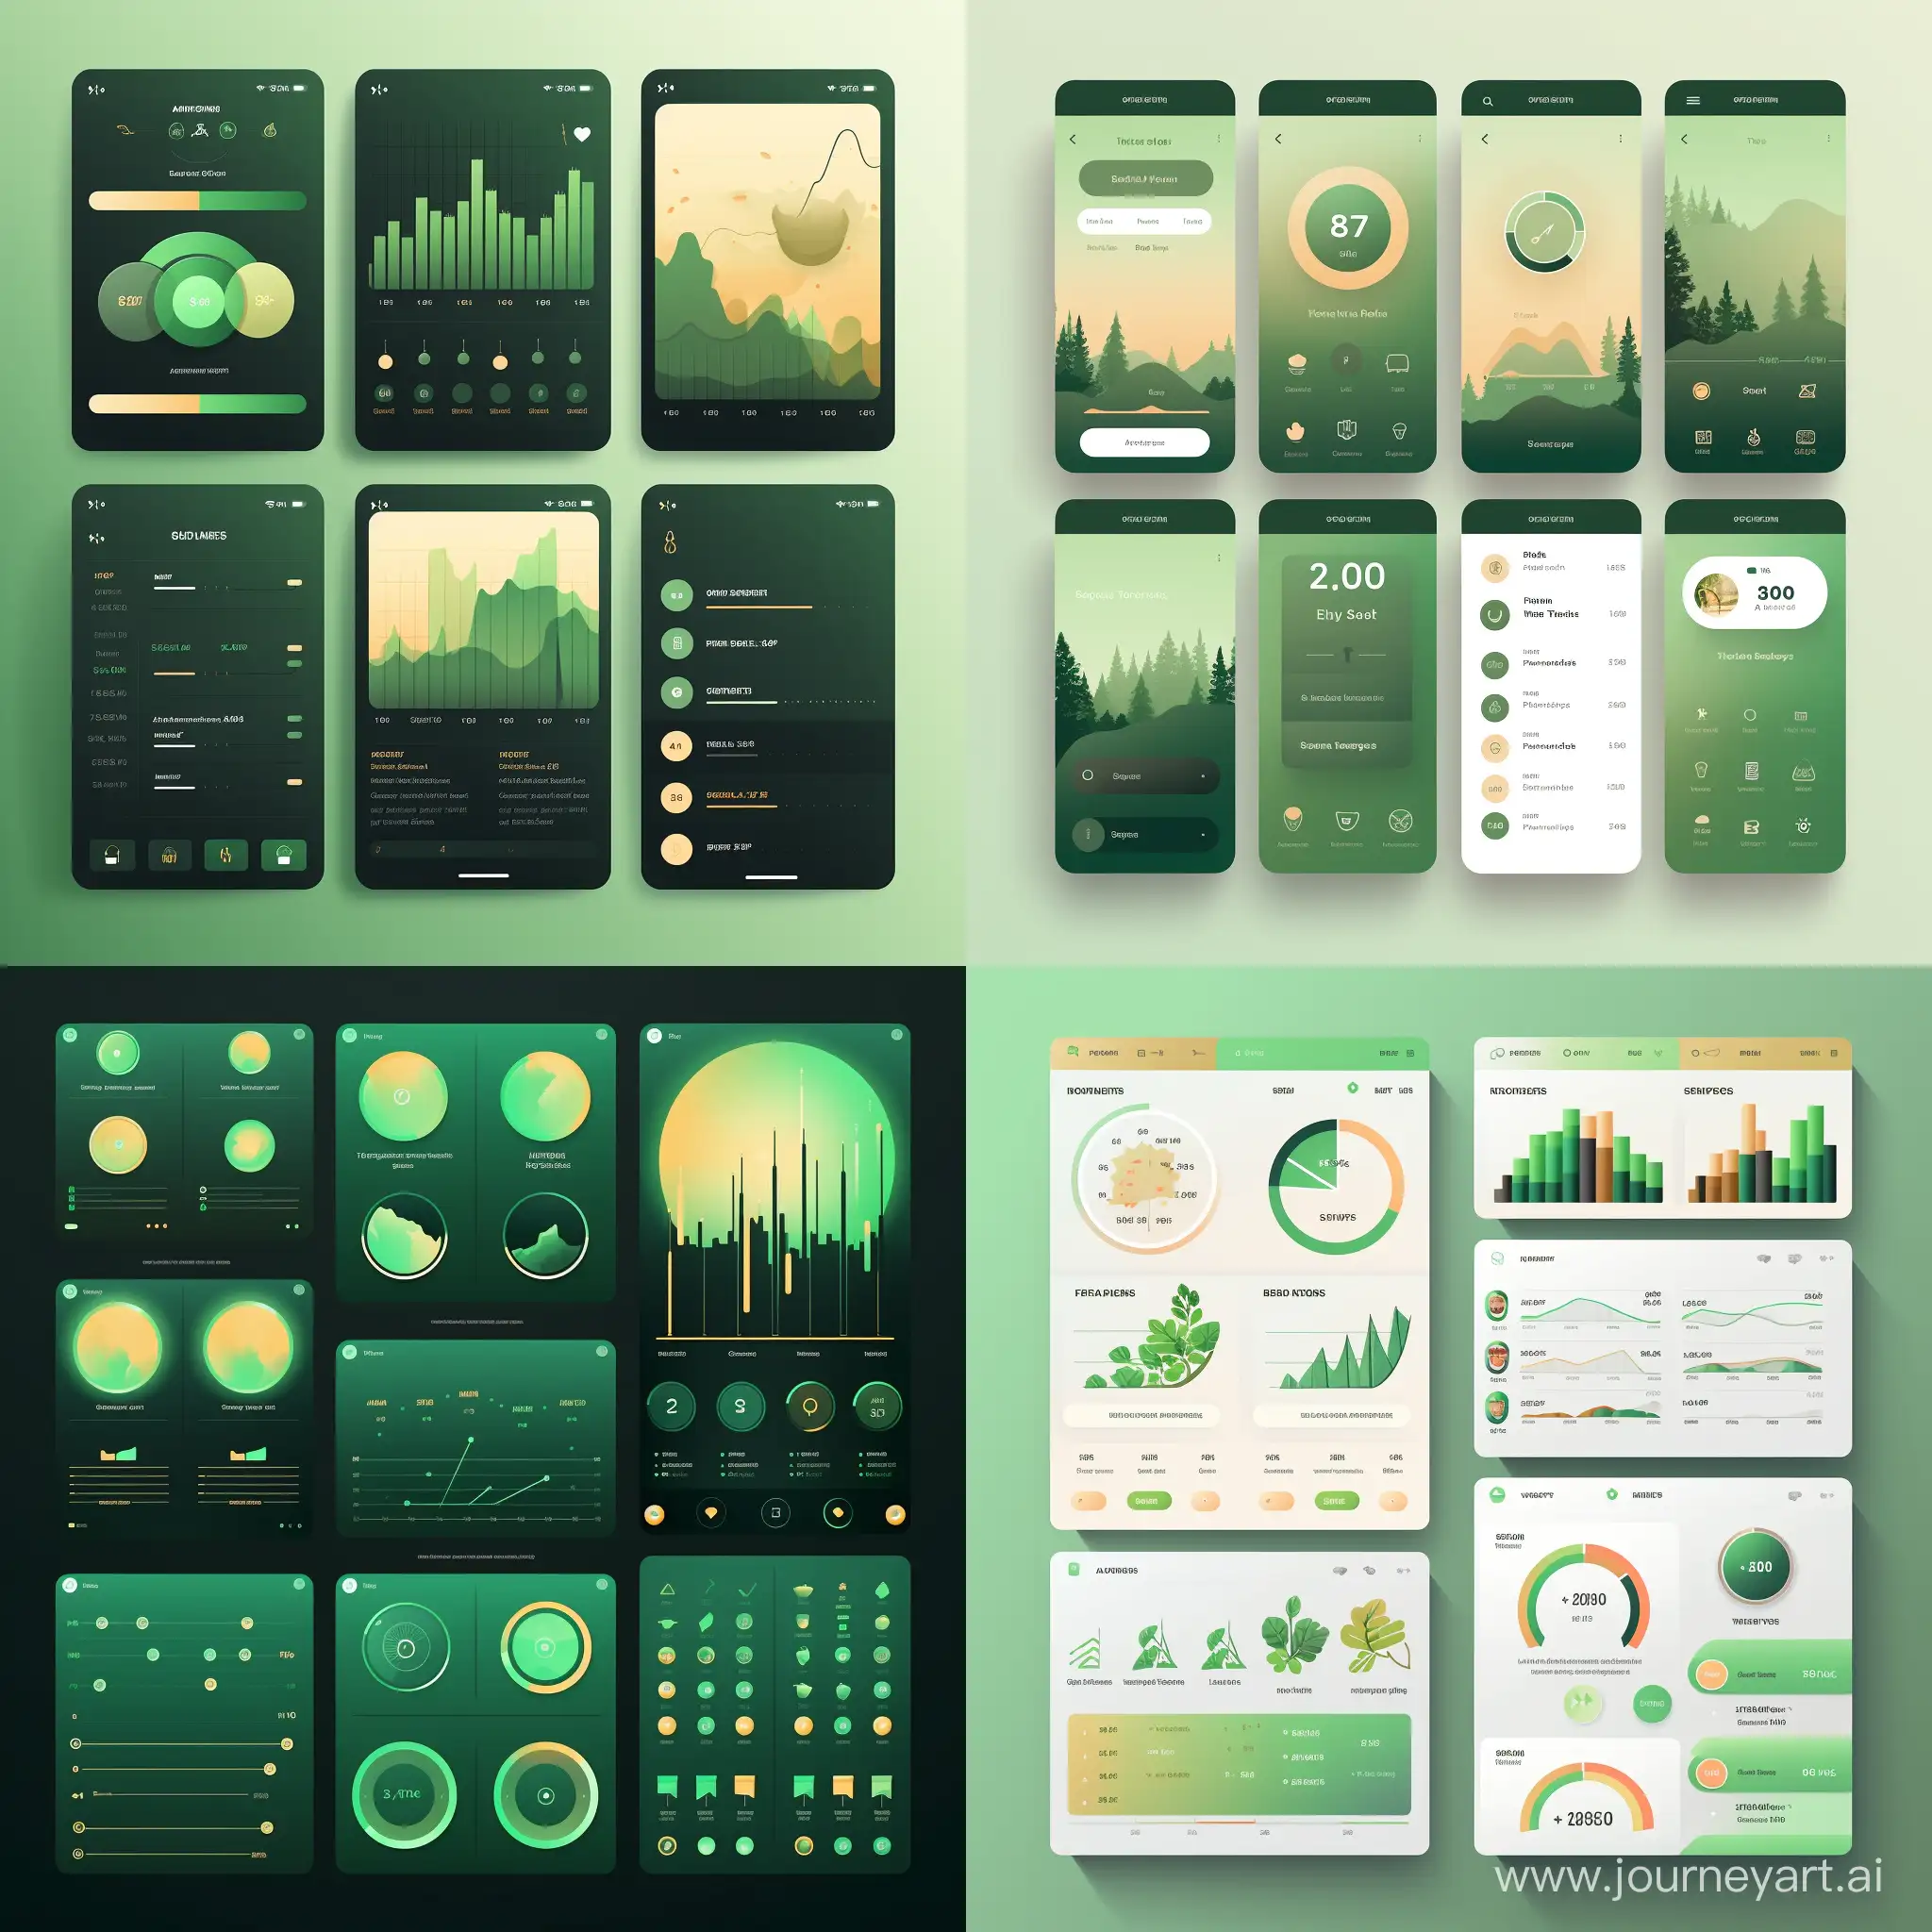 Mobile-Money-Management-Interface-with-Charts-and-Category-Icons